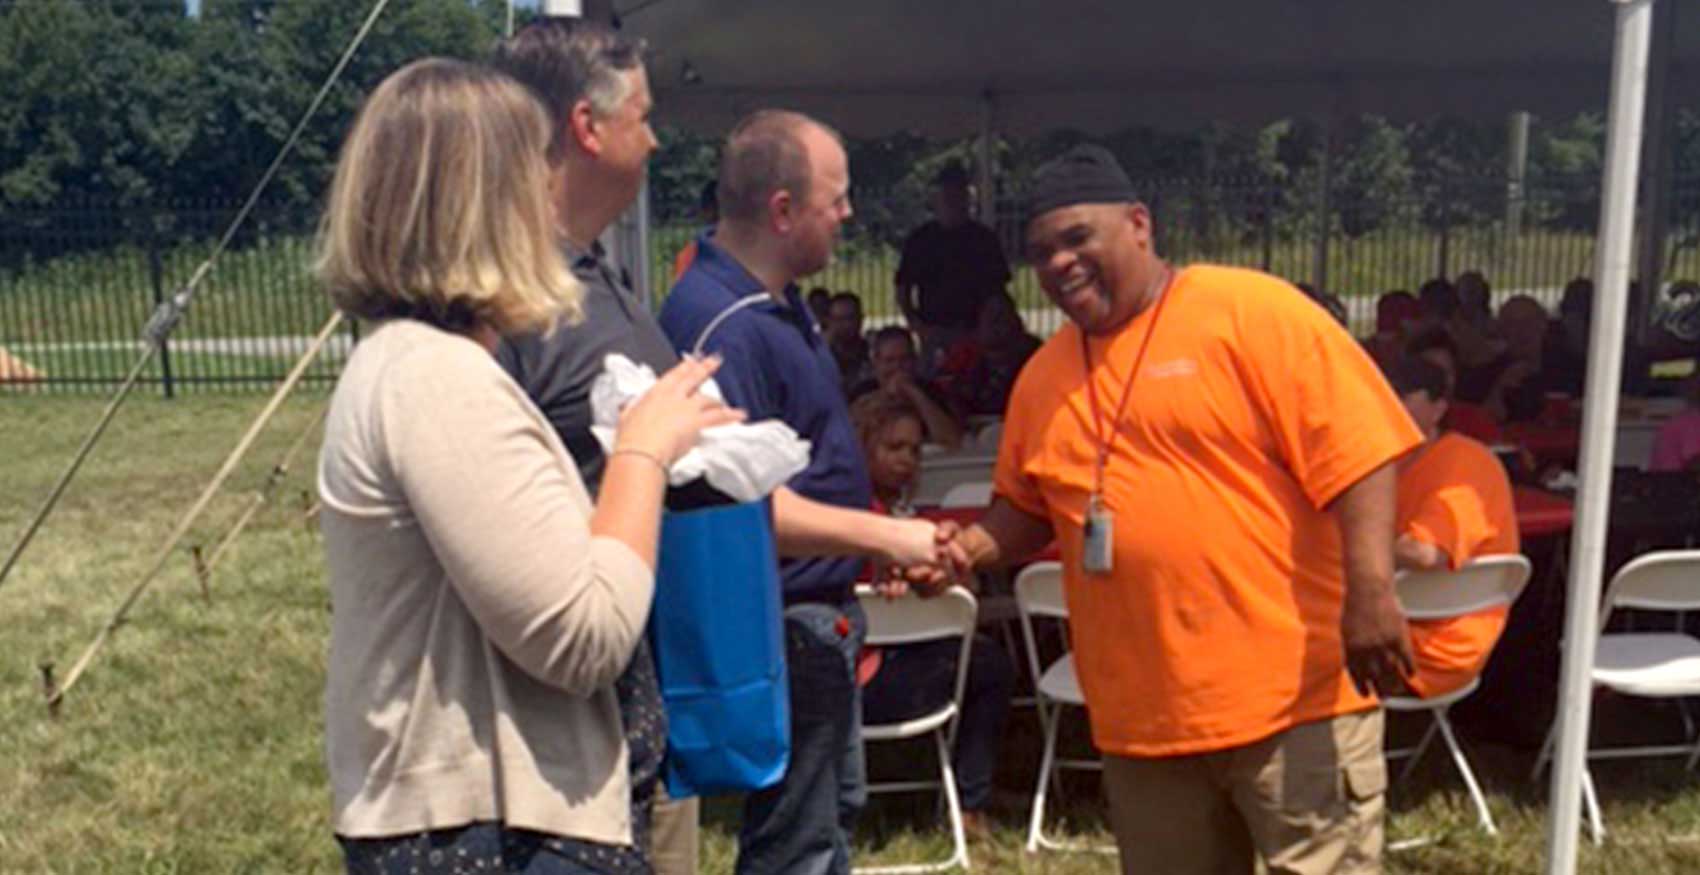 People shaking hands at a volunteer event